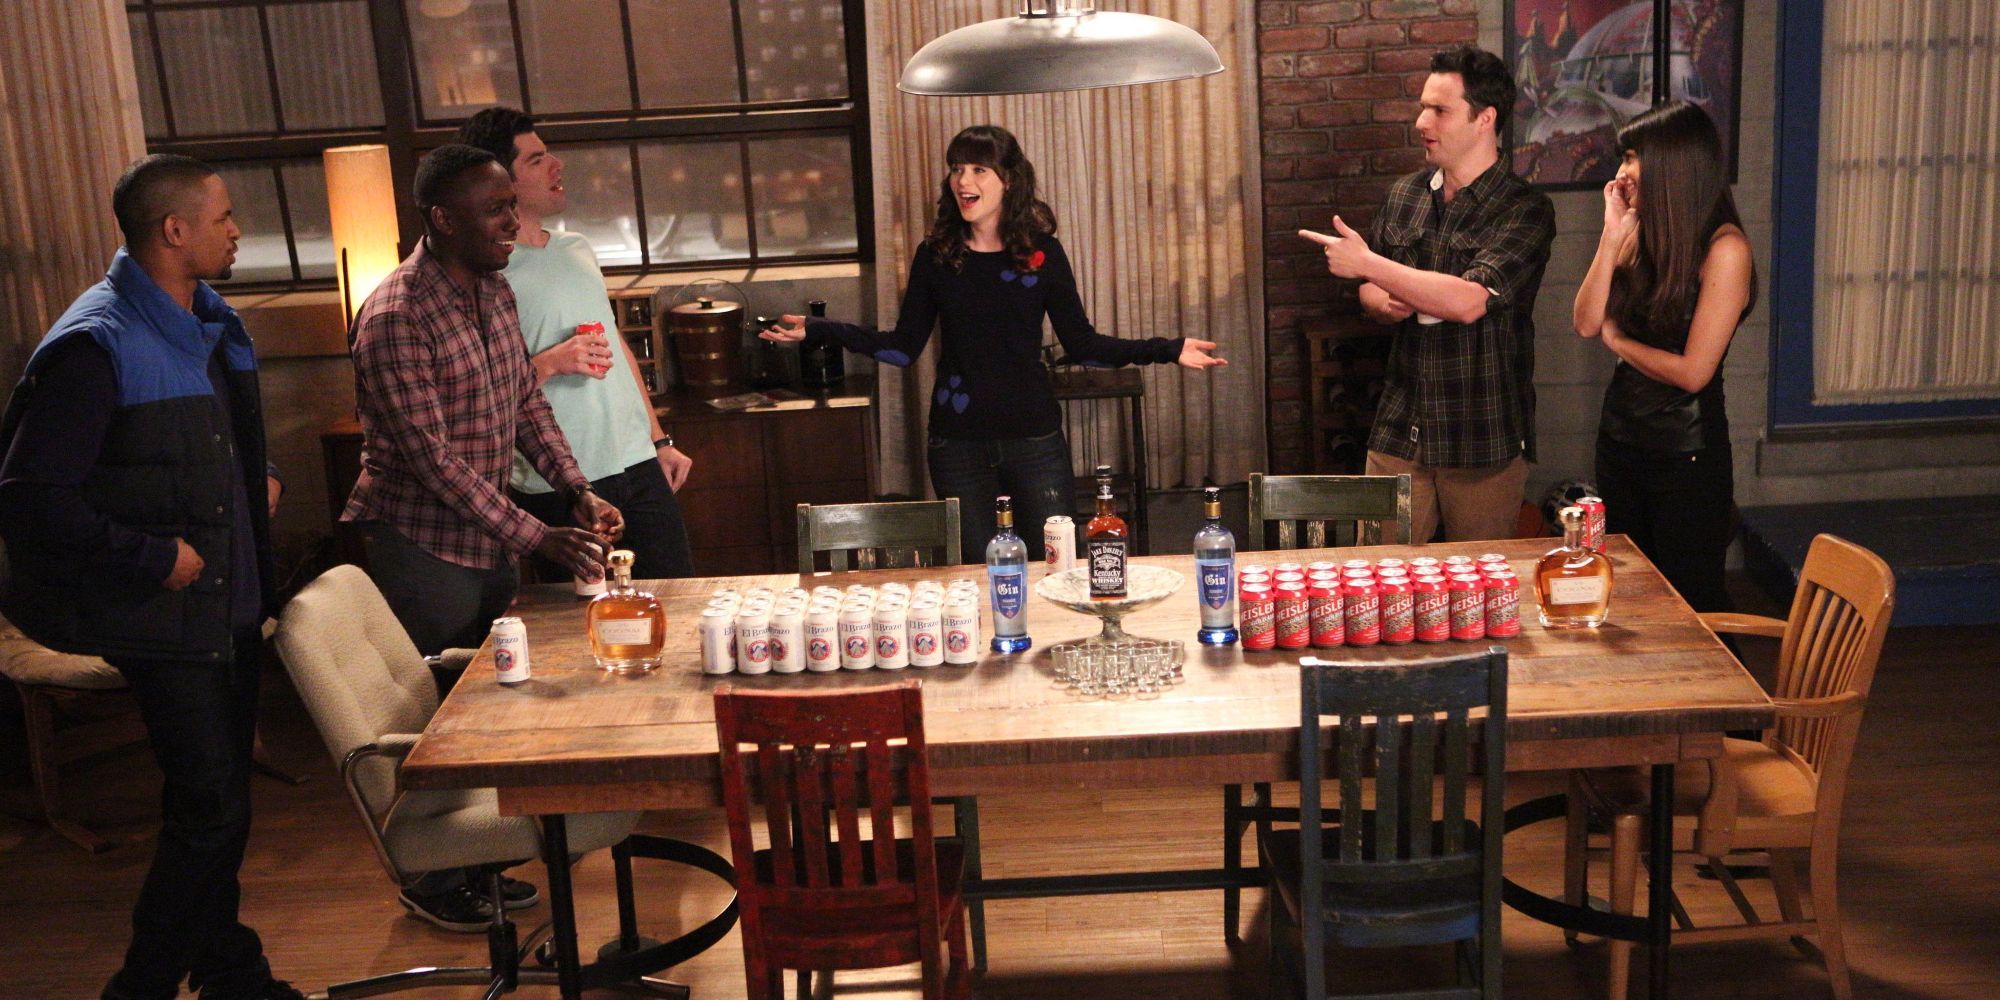 New Girl 10 Scenes Fans Love To Watch Over & Over